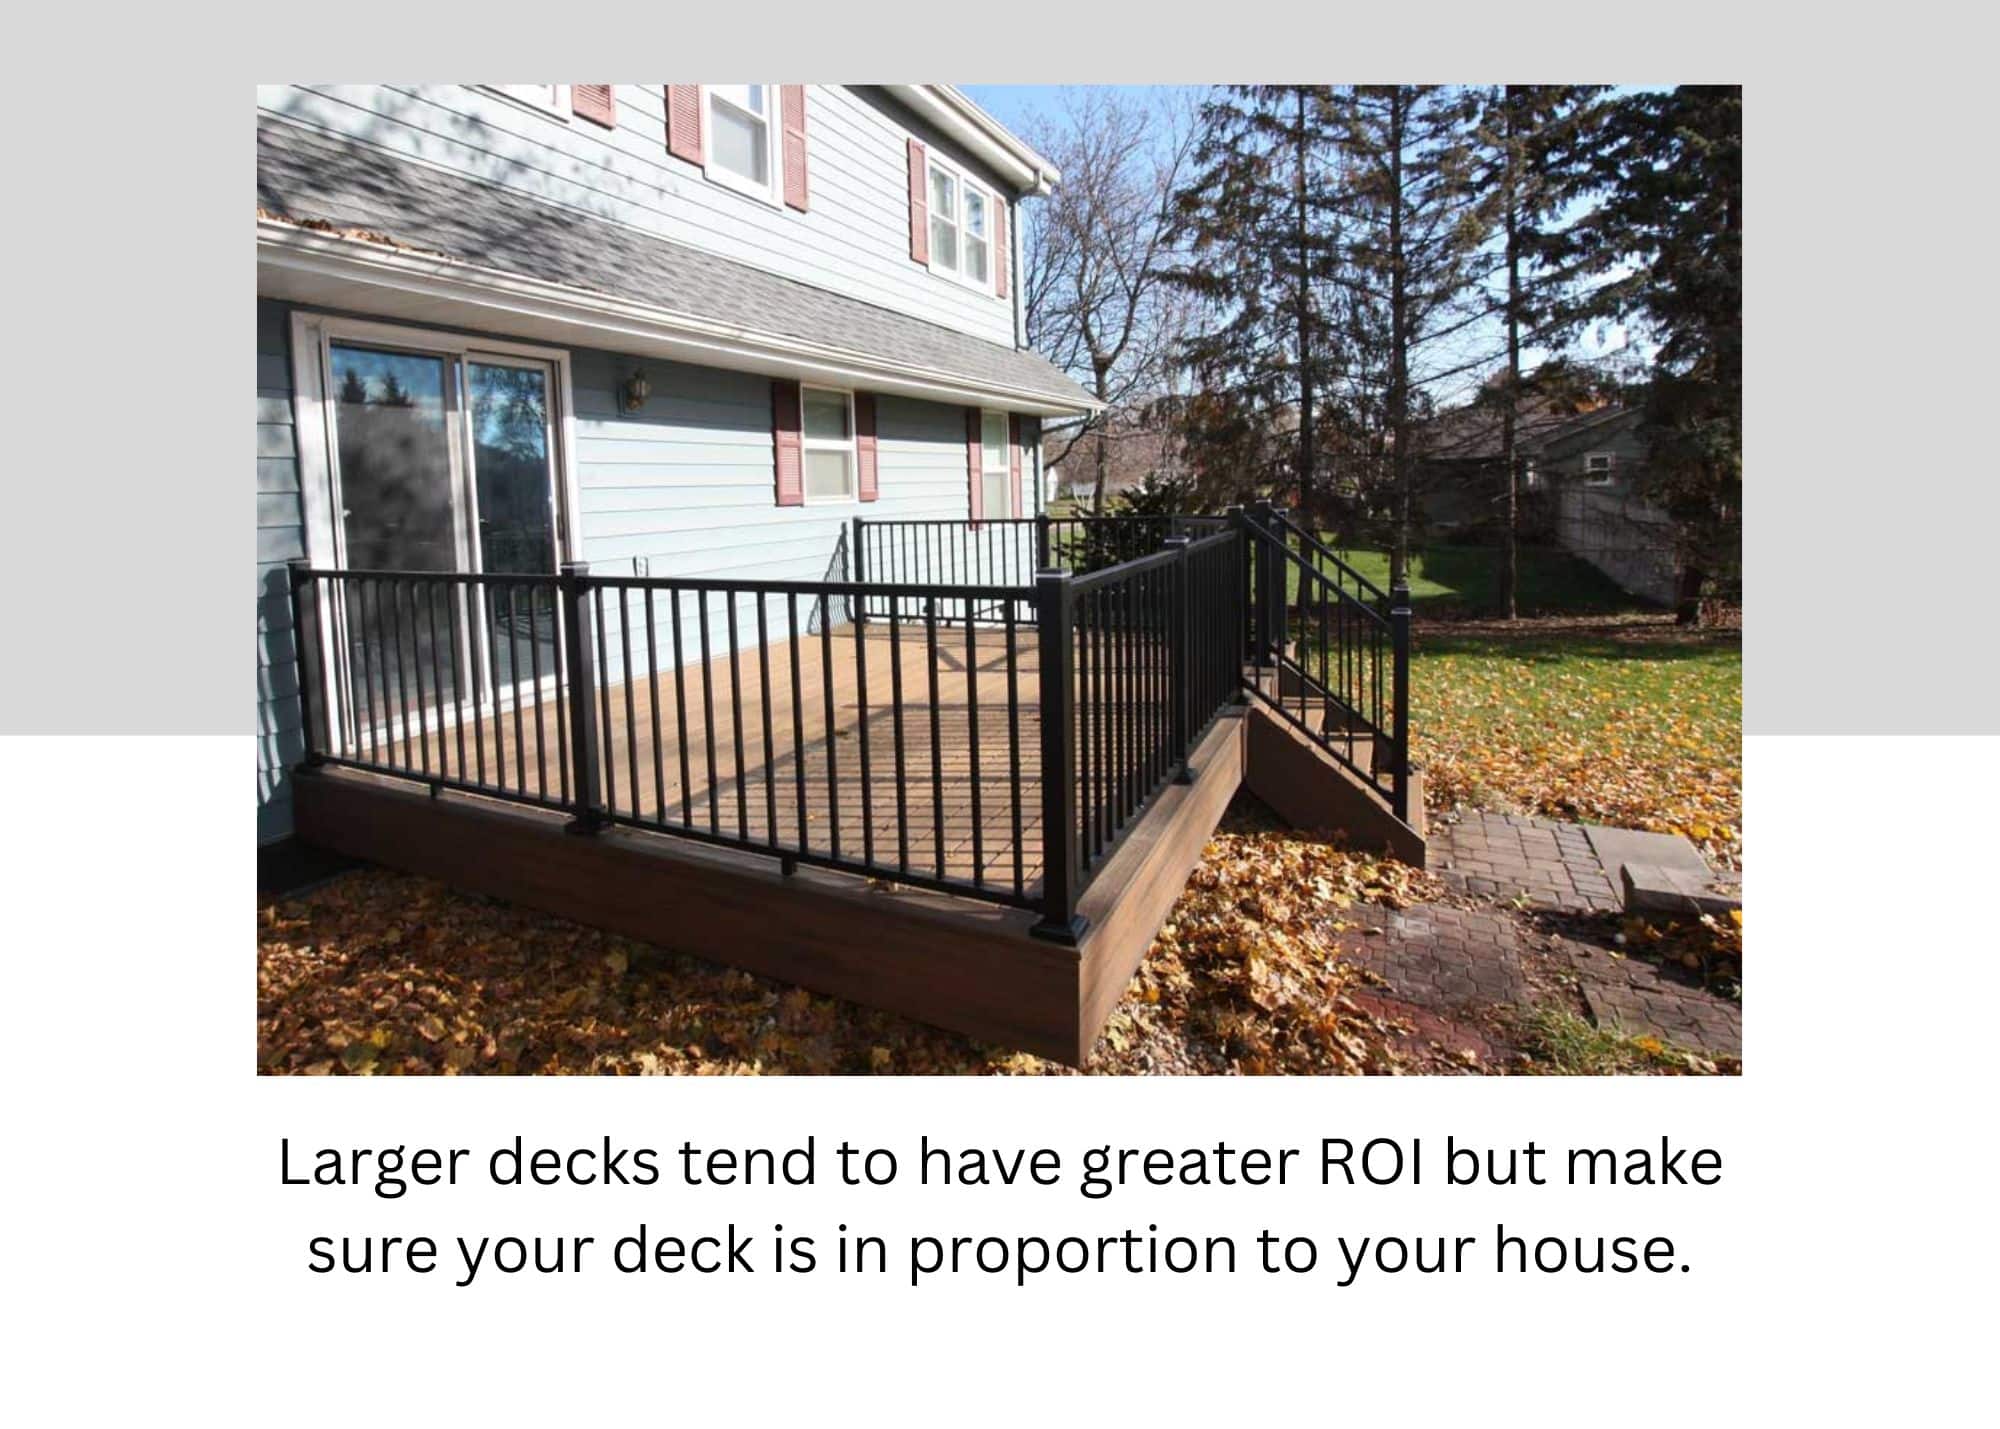 larger decks tend to have greater roi